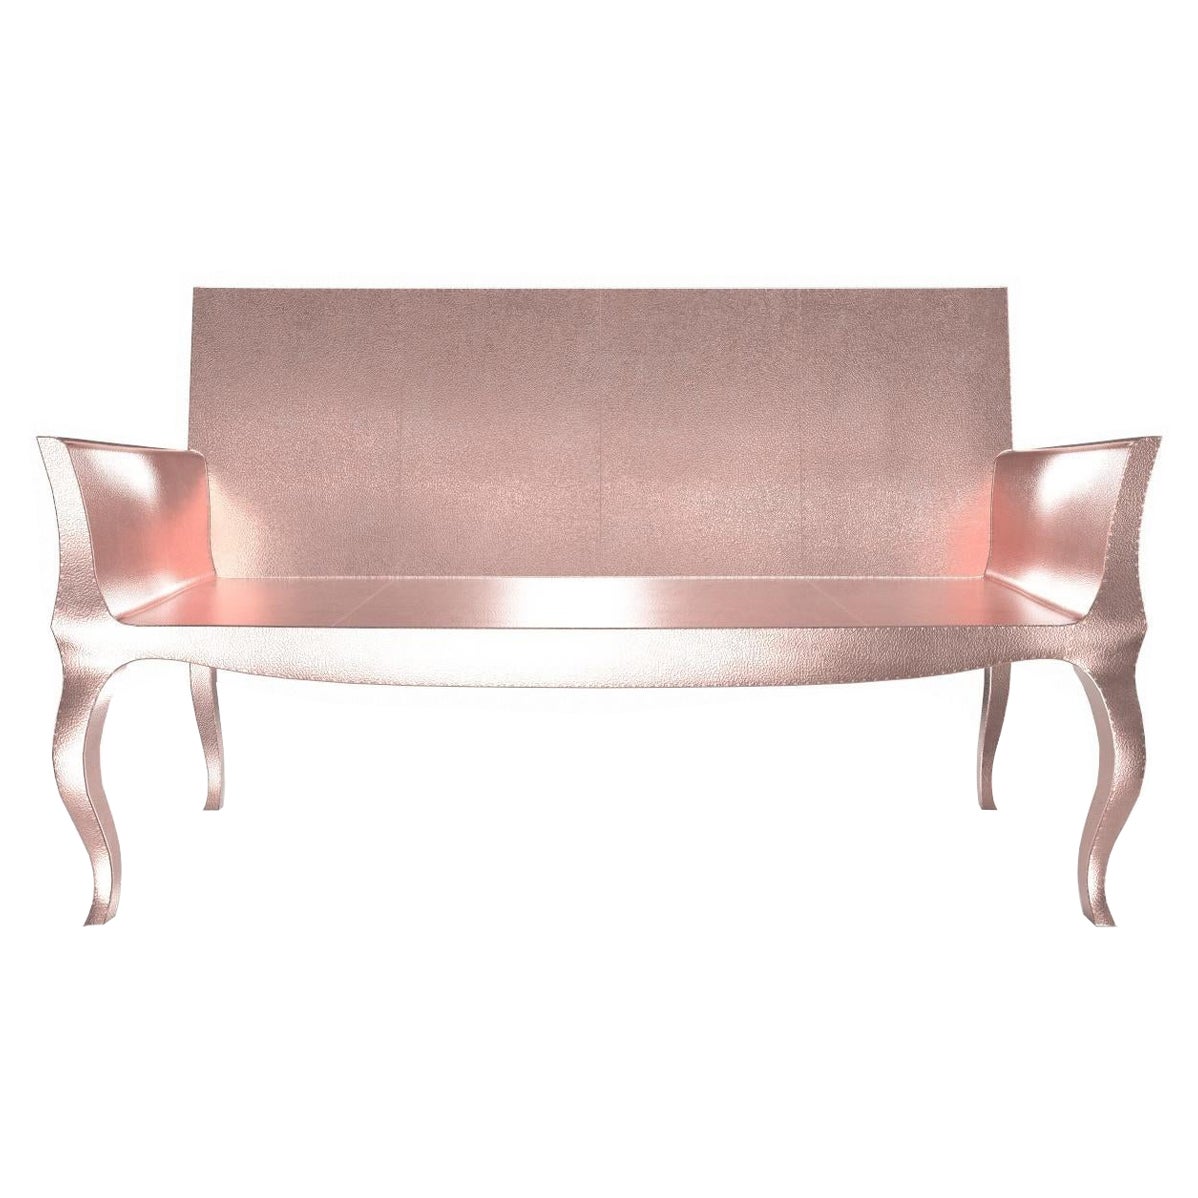 Louise Settee Art Deco Lounge Chairs in Fine Hammered Copper by Paul Mathieu